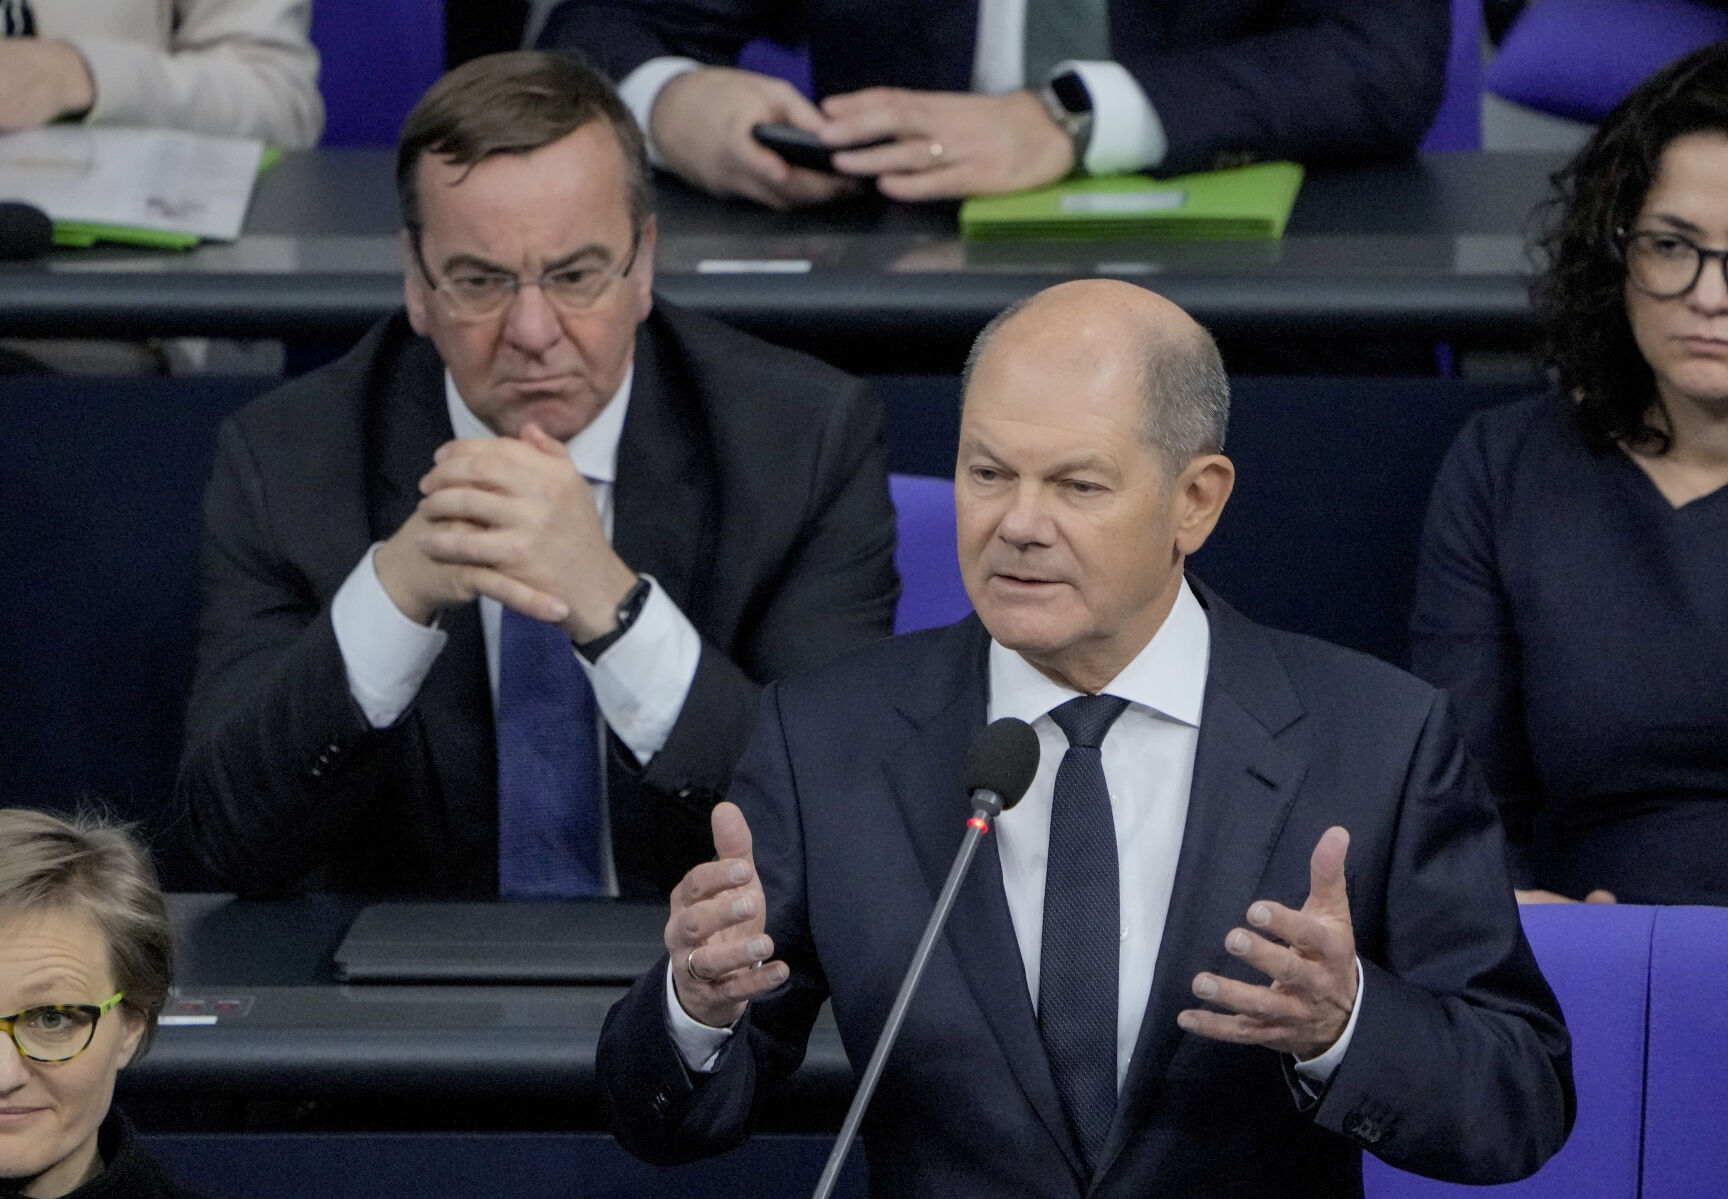 <p>German Chancellor Olaf Scholz, right, speaks to the lawmakers in the German parliament Bundestag in Berlin, Wednesday, Jan. 25, 2023. Left is defense minister Boris Pistorius. The German government has confirmed it will provide Ukraine with Leopard 2 battle tanks and approve requests by other countries to do the same. (Photo/Markus Schreiber)</p>   PHOTO CREDIT: Markus Schreiber - staff, AP